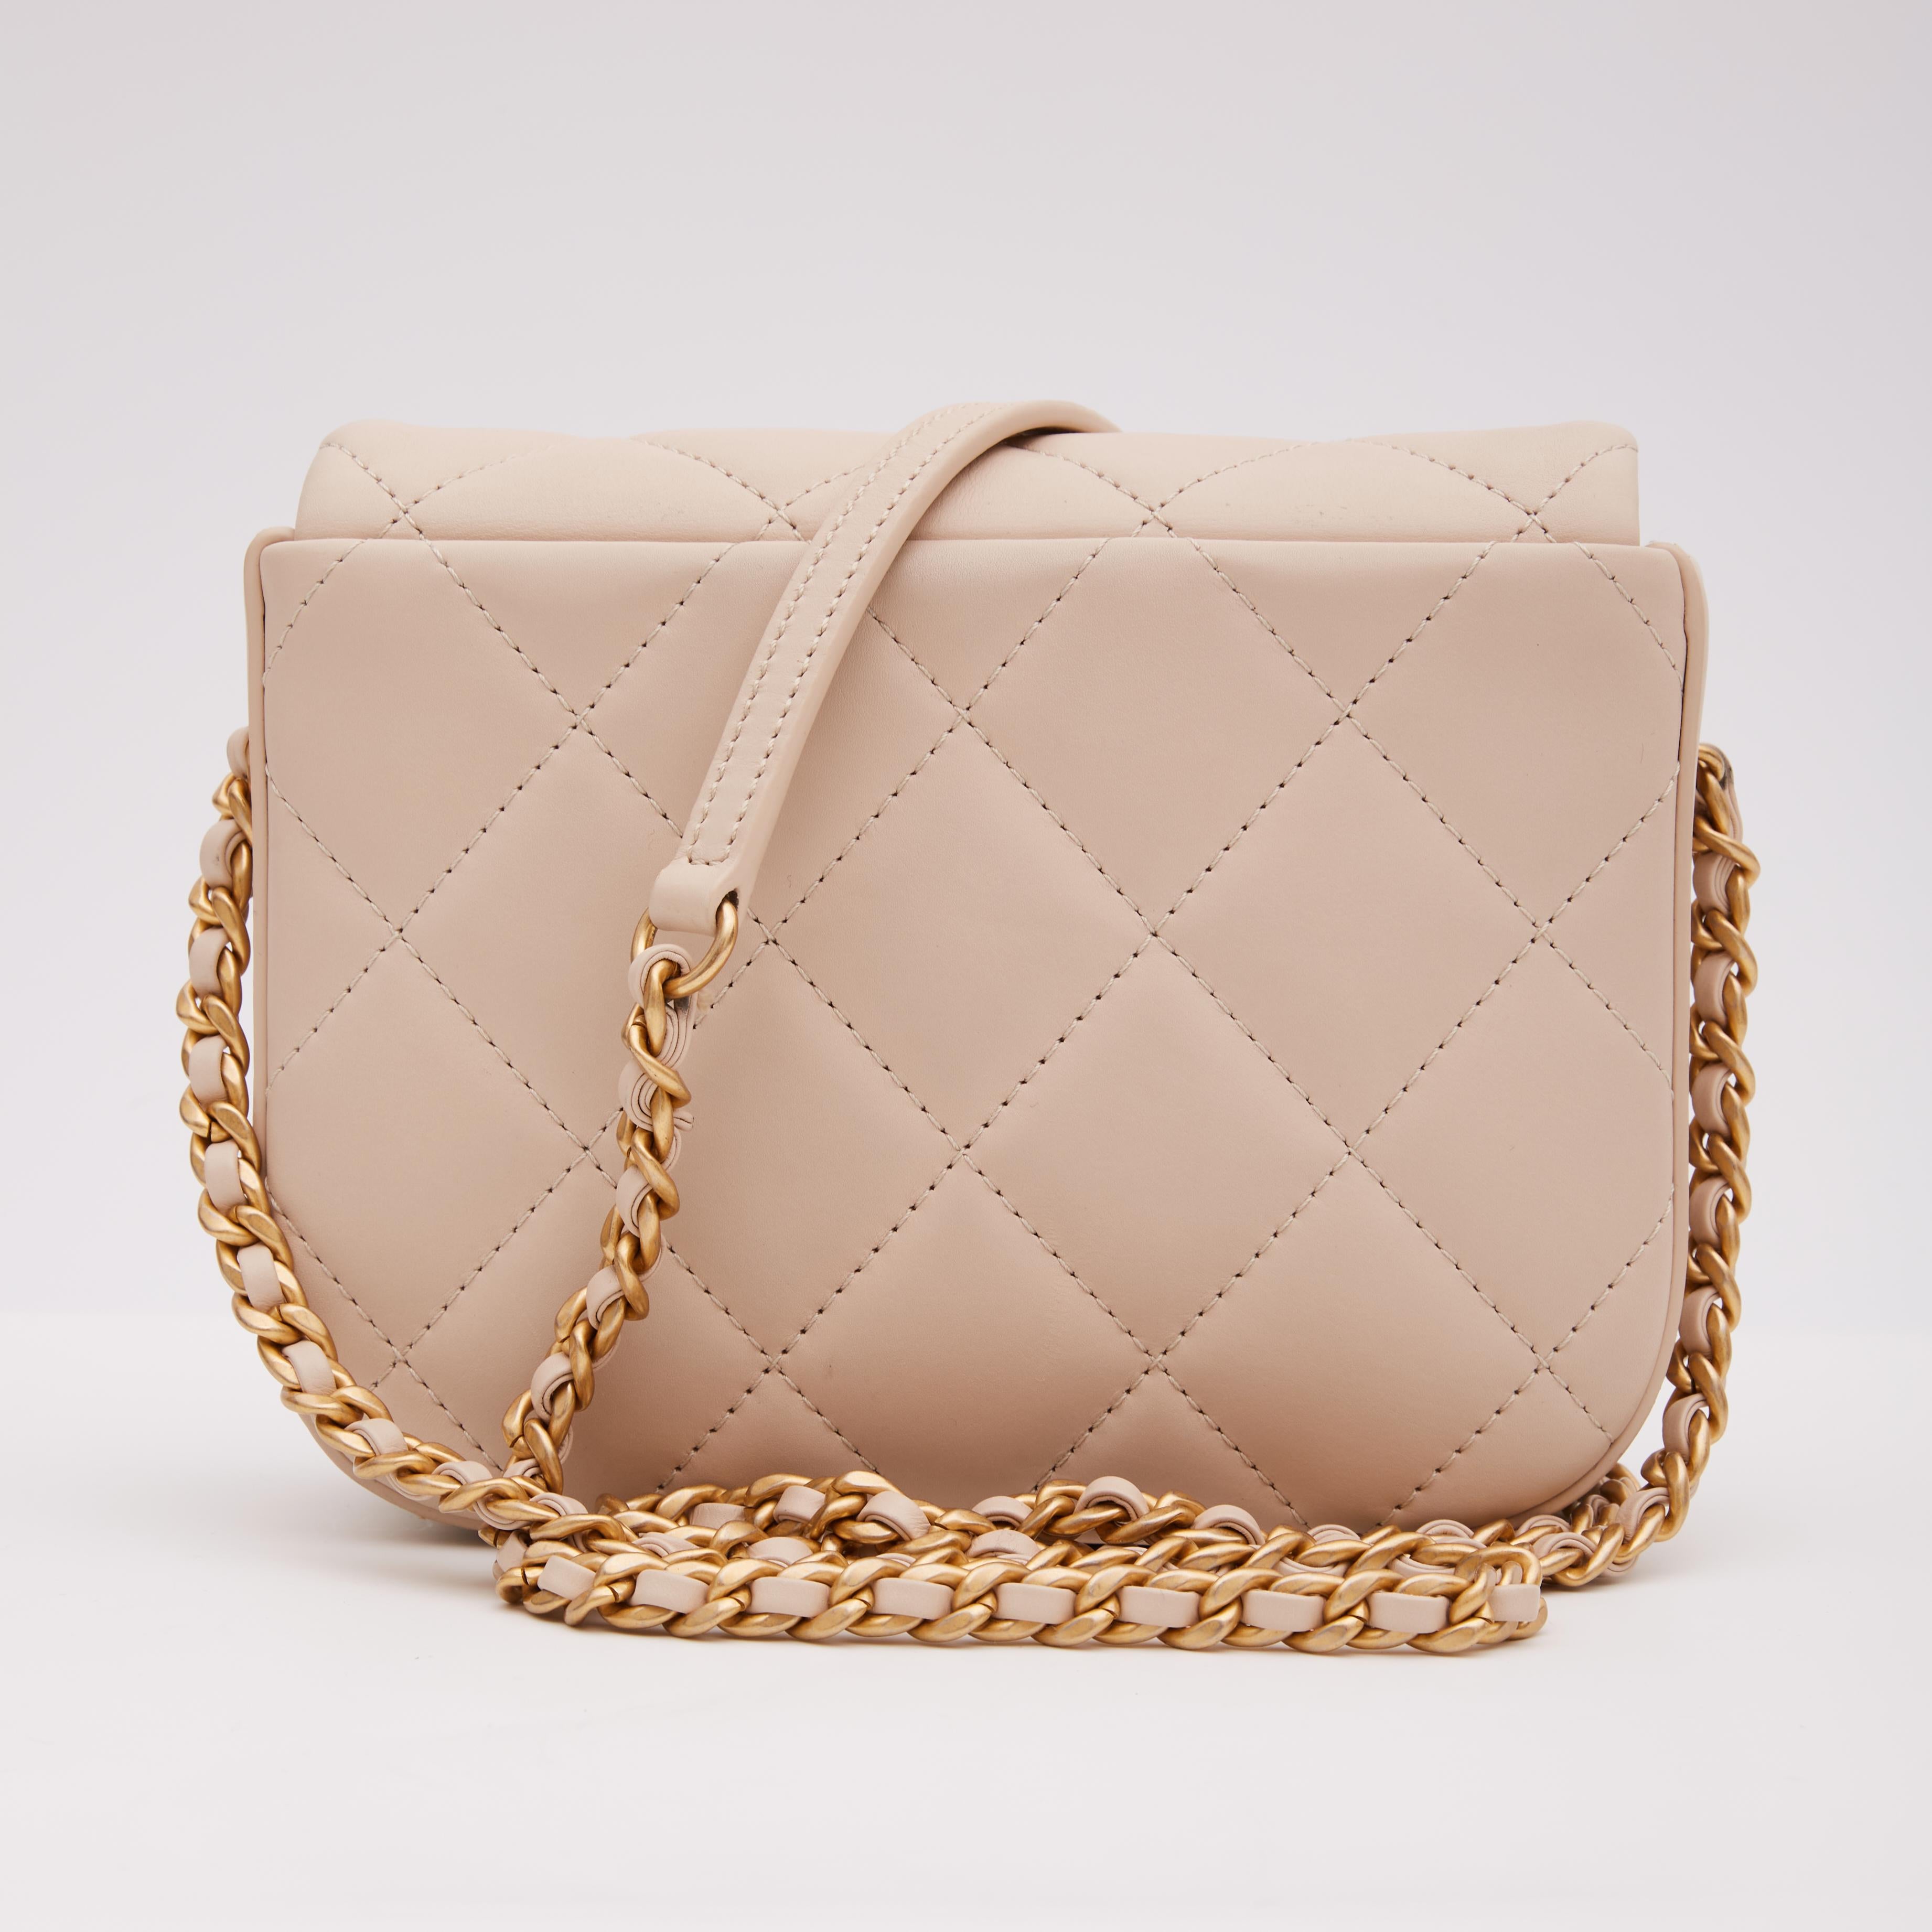 Chanel bags with the code 30XXXXXX are manufactured in 2020.

COLOR: Nude Pink
MATERIAL: Lamb skin
ITEM CODE: 30713884
MEASURES: H 5.5” x L 6.75” x D 2 1/4”
DROP: 25”
COMES WITH: Authenticity card, dust bag, care papers, box, ribbon.
CONDITION: Very